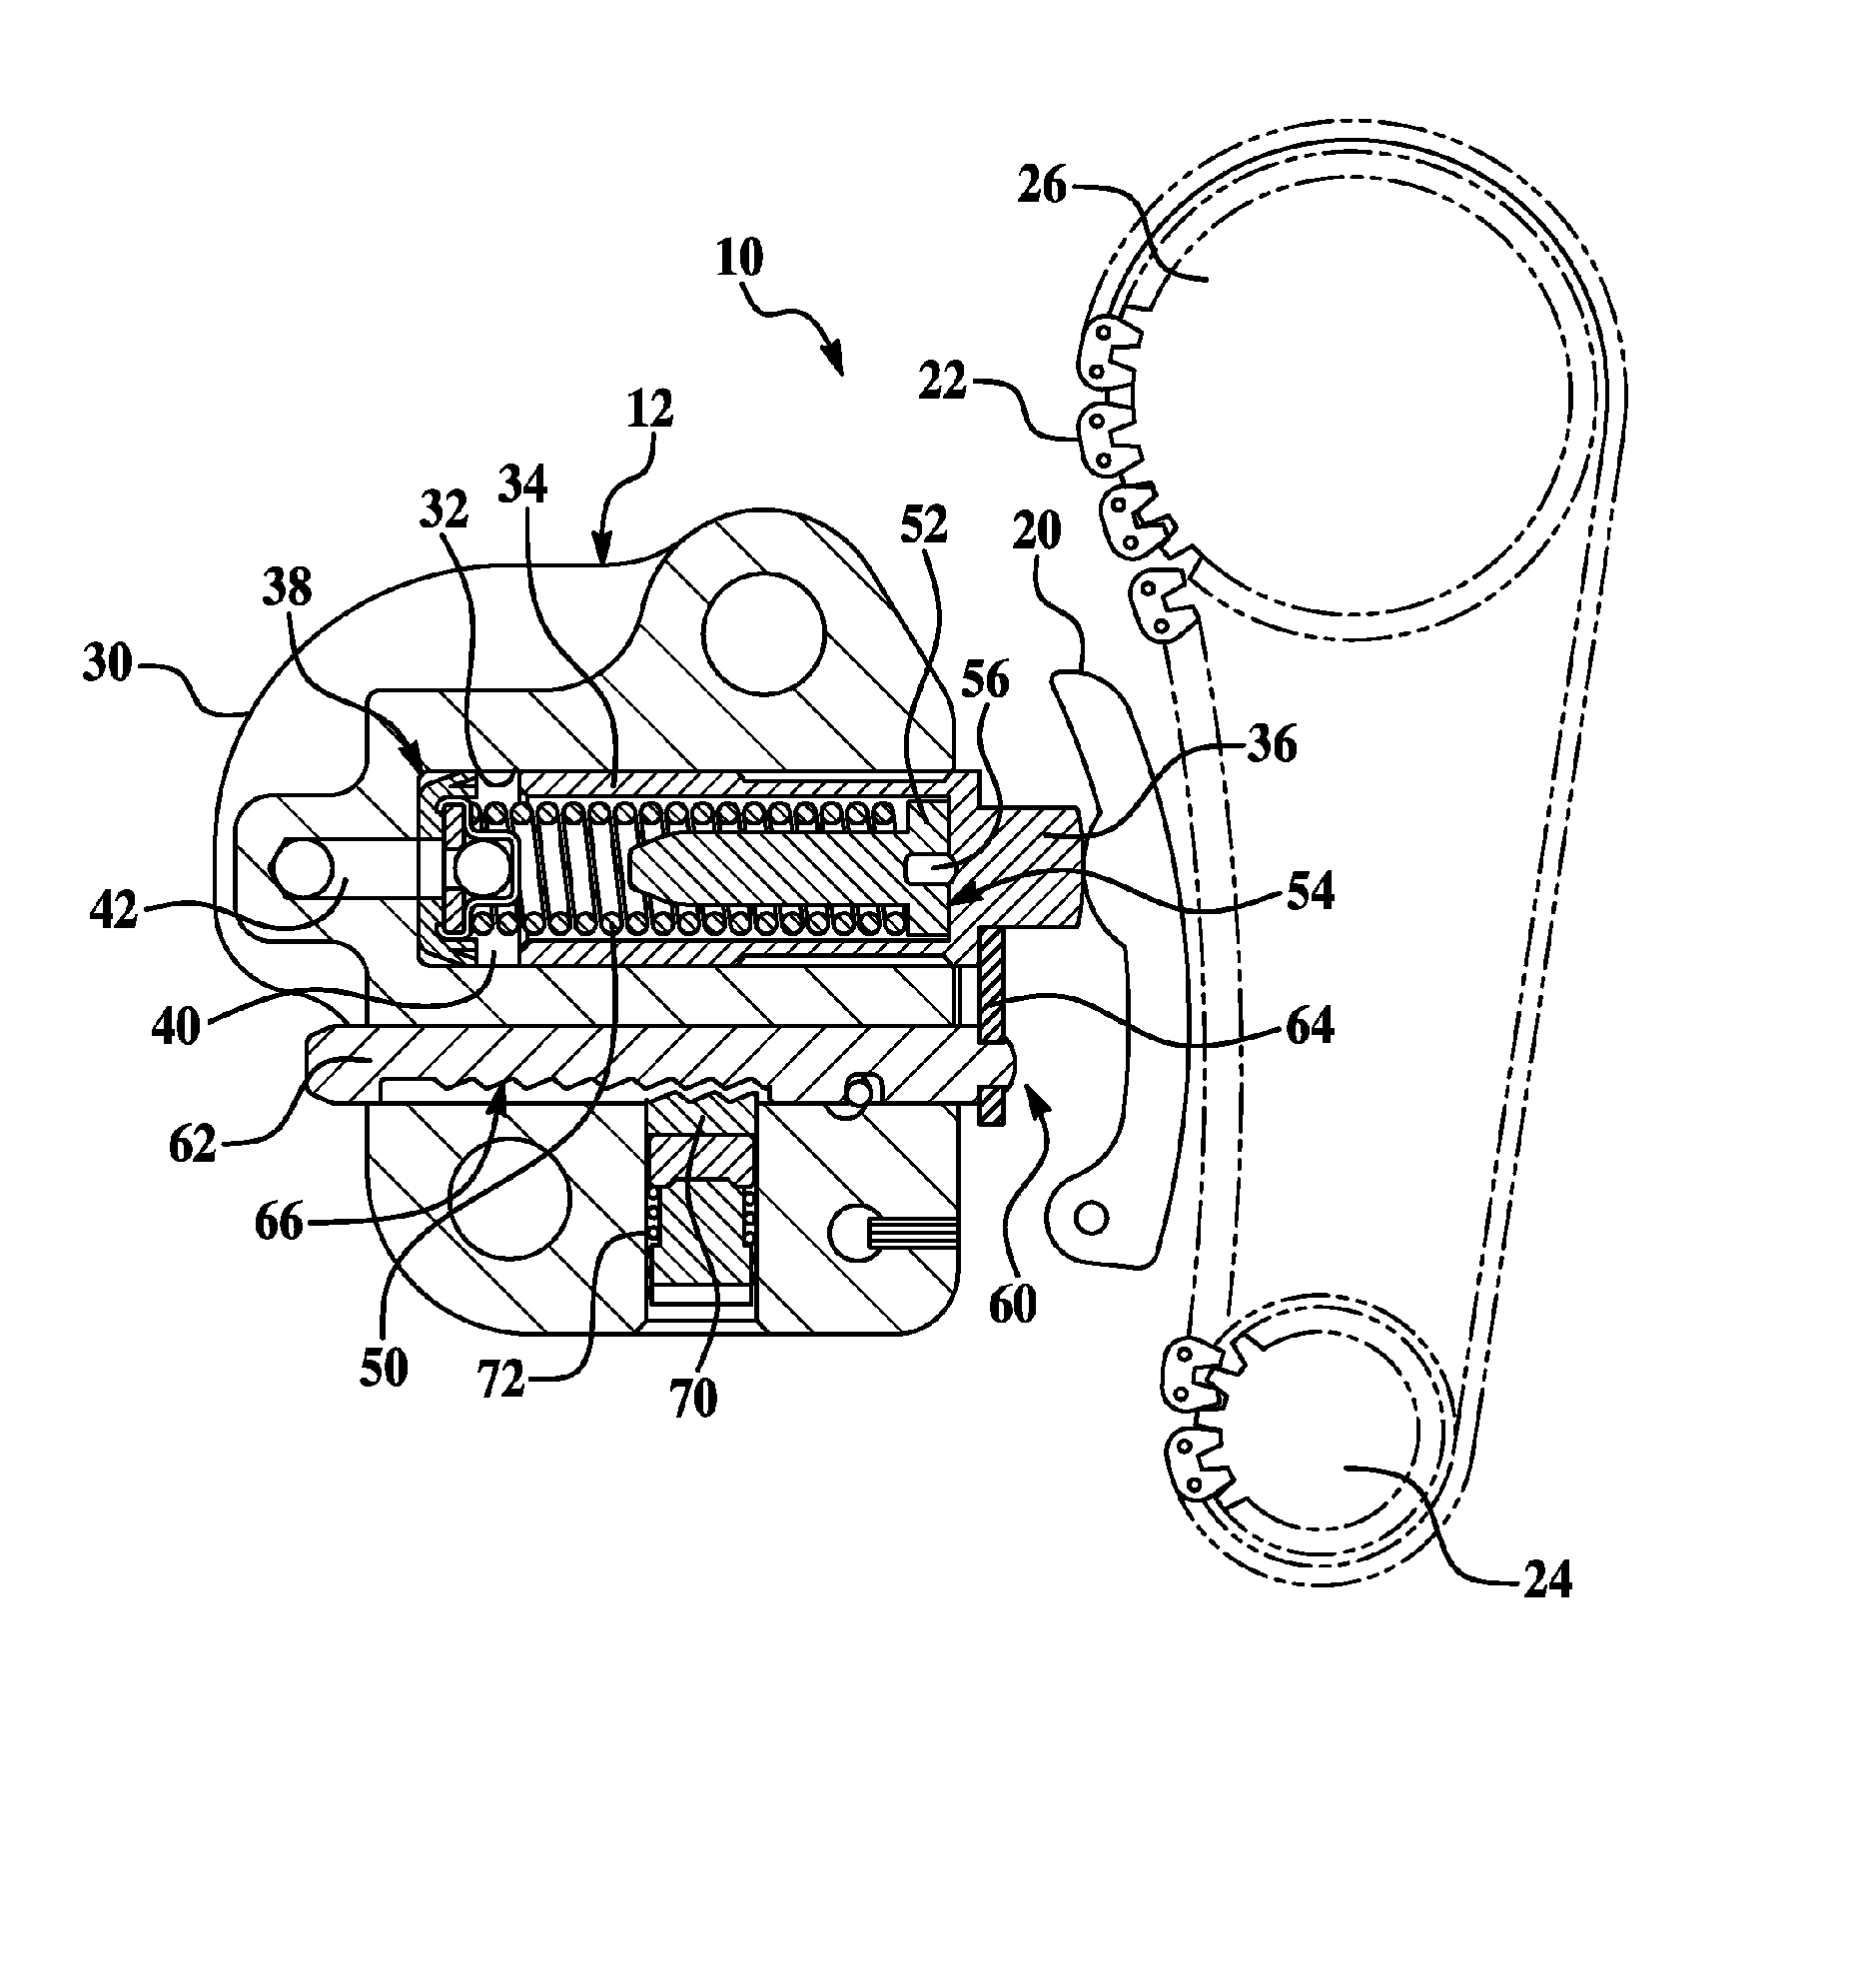 Ratcheting tensioner with override